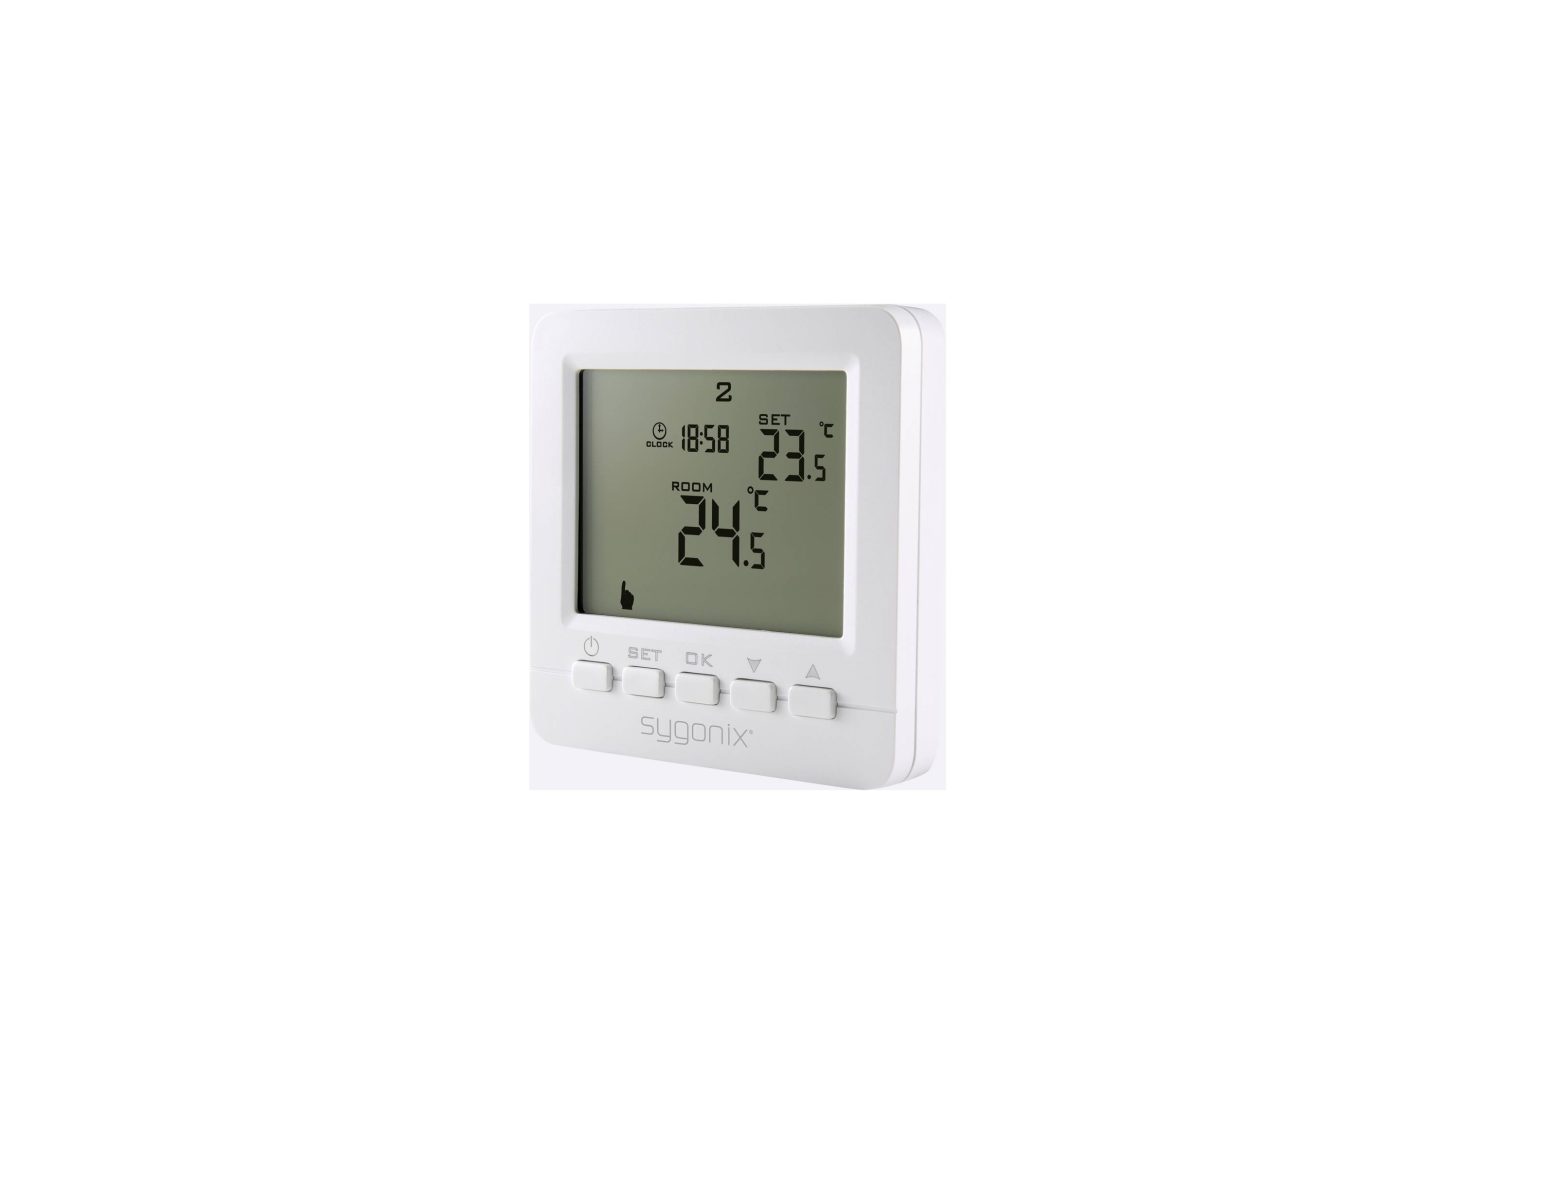 sygonix 2250409 Heating Thermostat with Sensor Instruction Manual